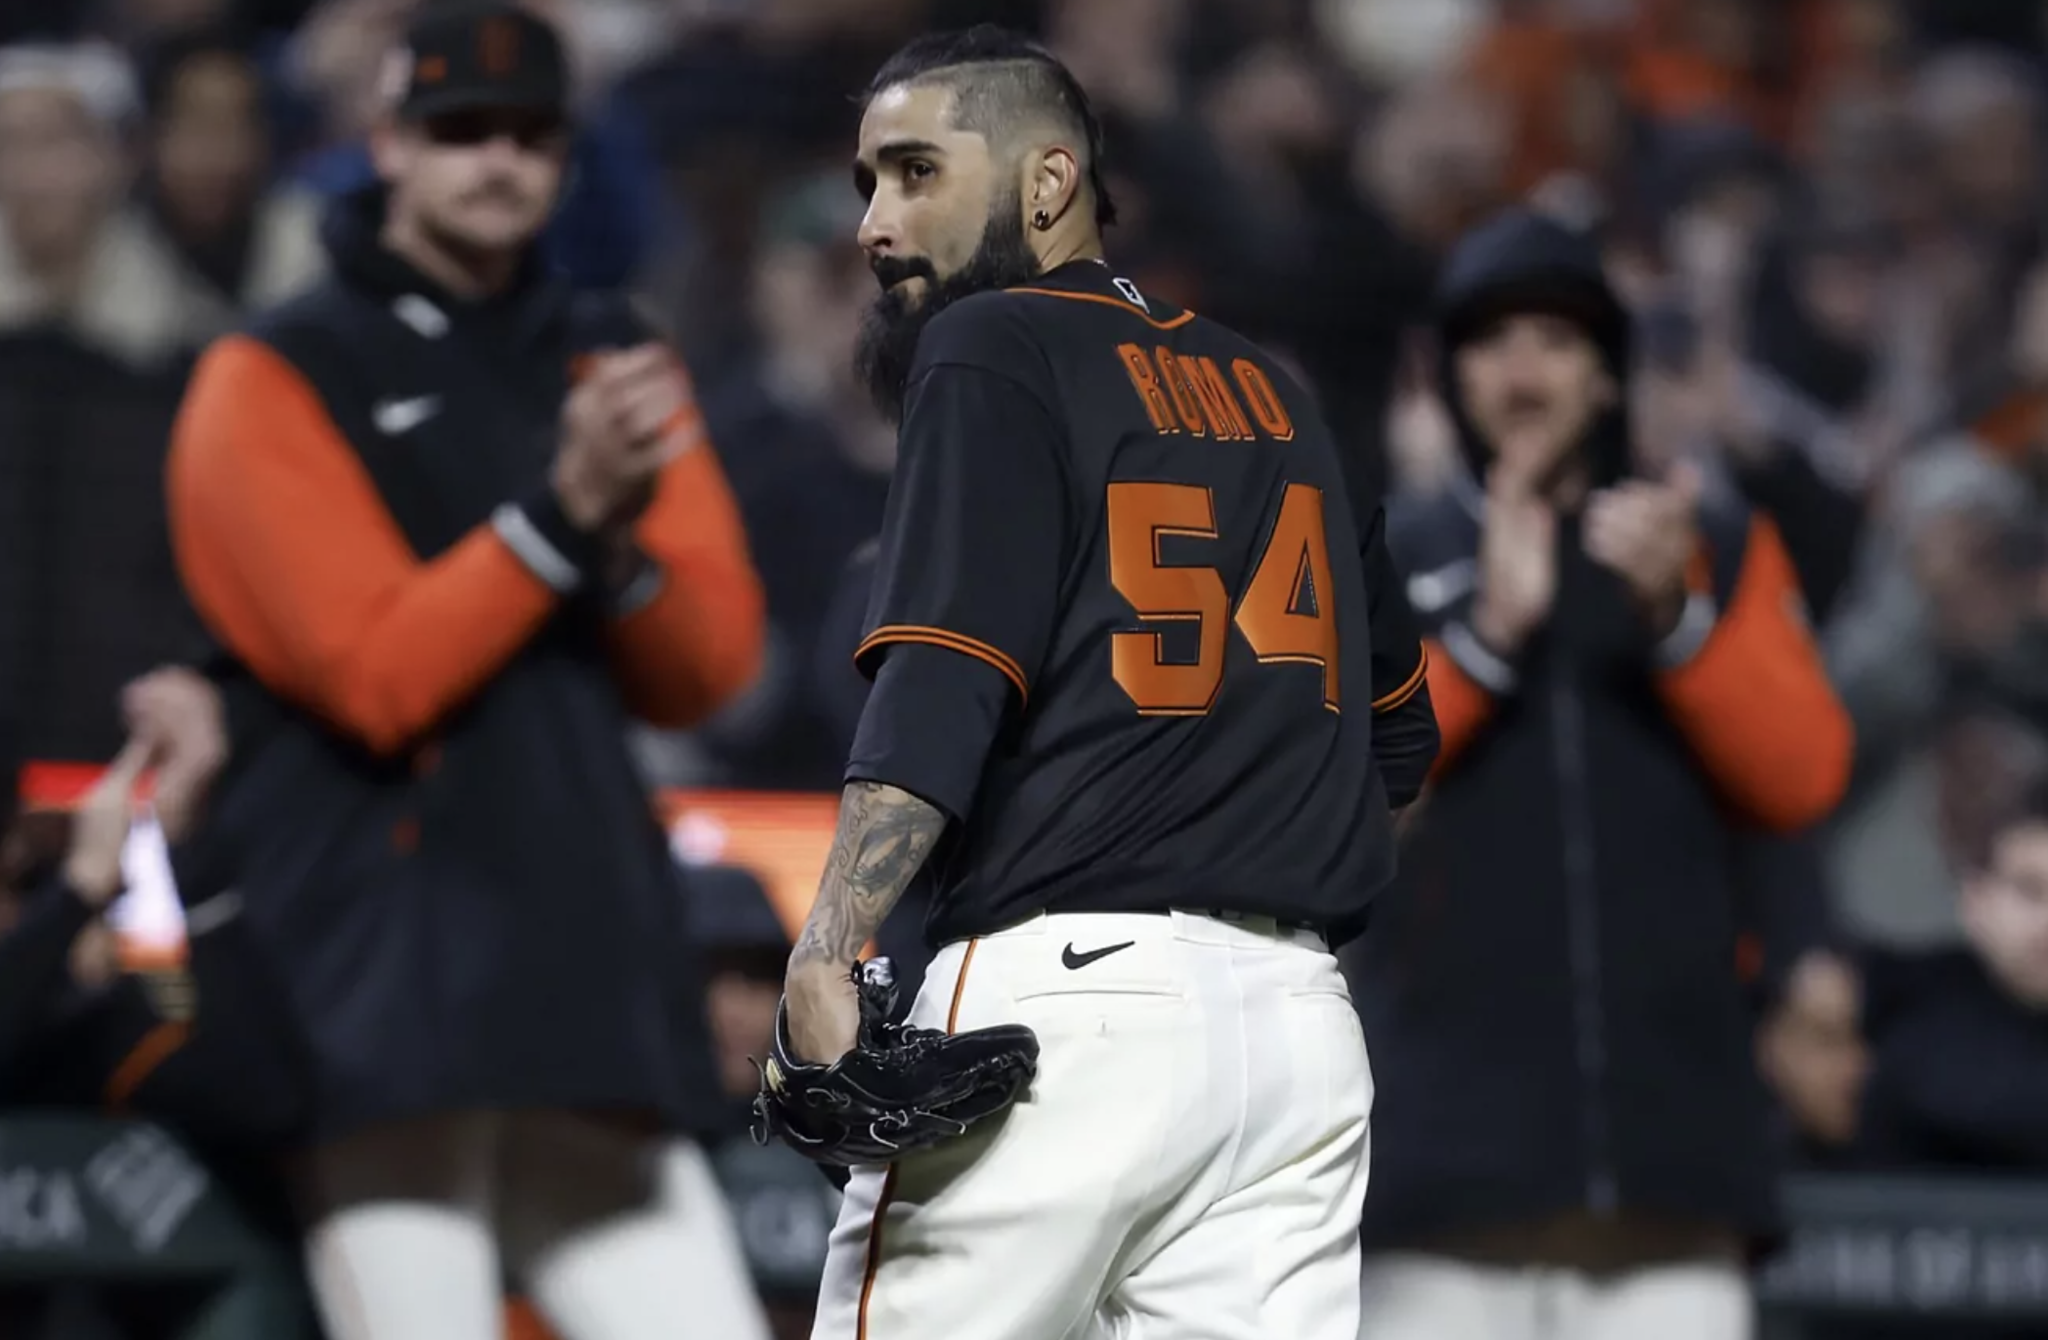 Sergio Romo throws an emotional last ball for the Giants as he says goodbye to MLB